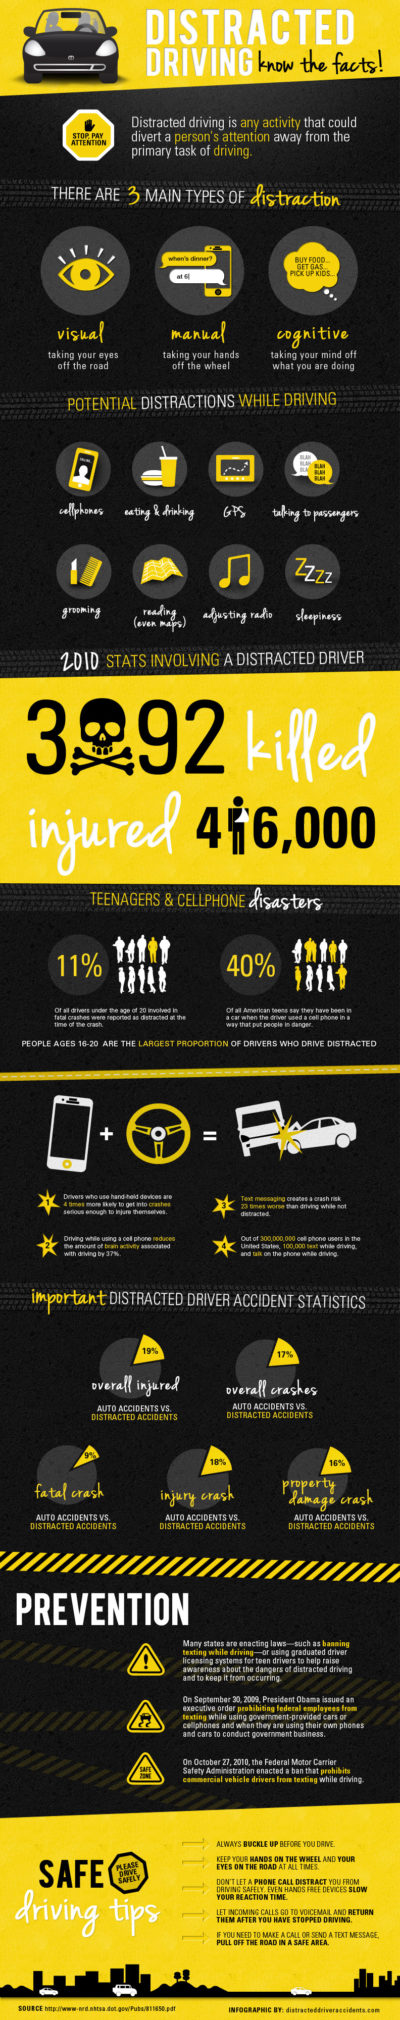 Dangers of Distracted Driving (Infographic) | Distracted Driver Accidents